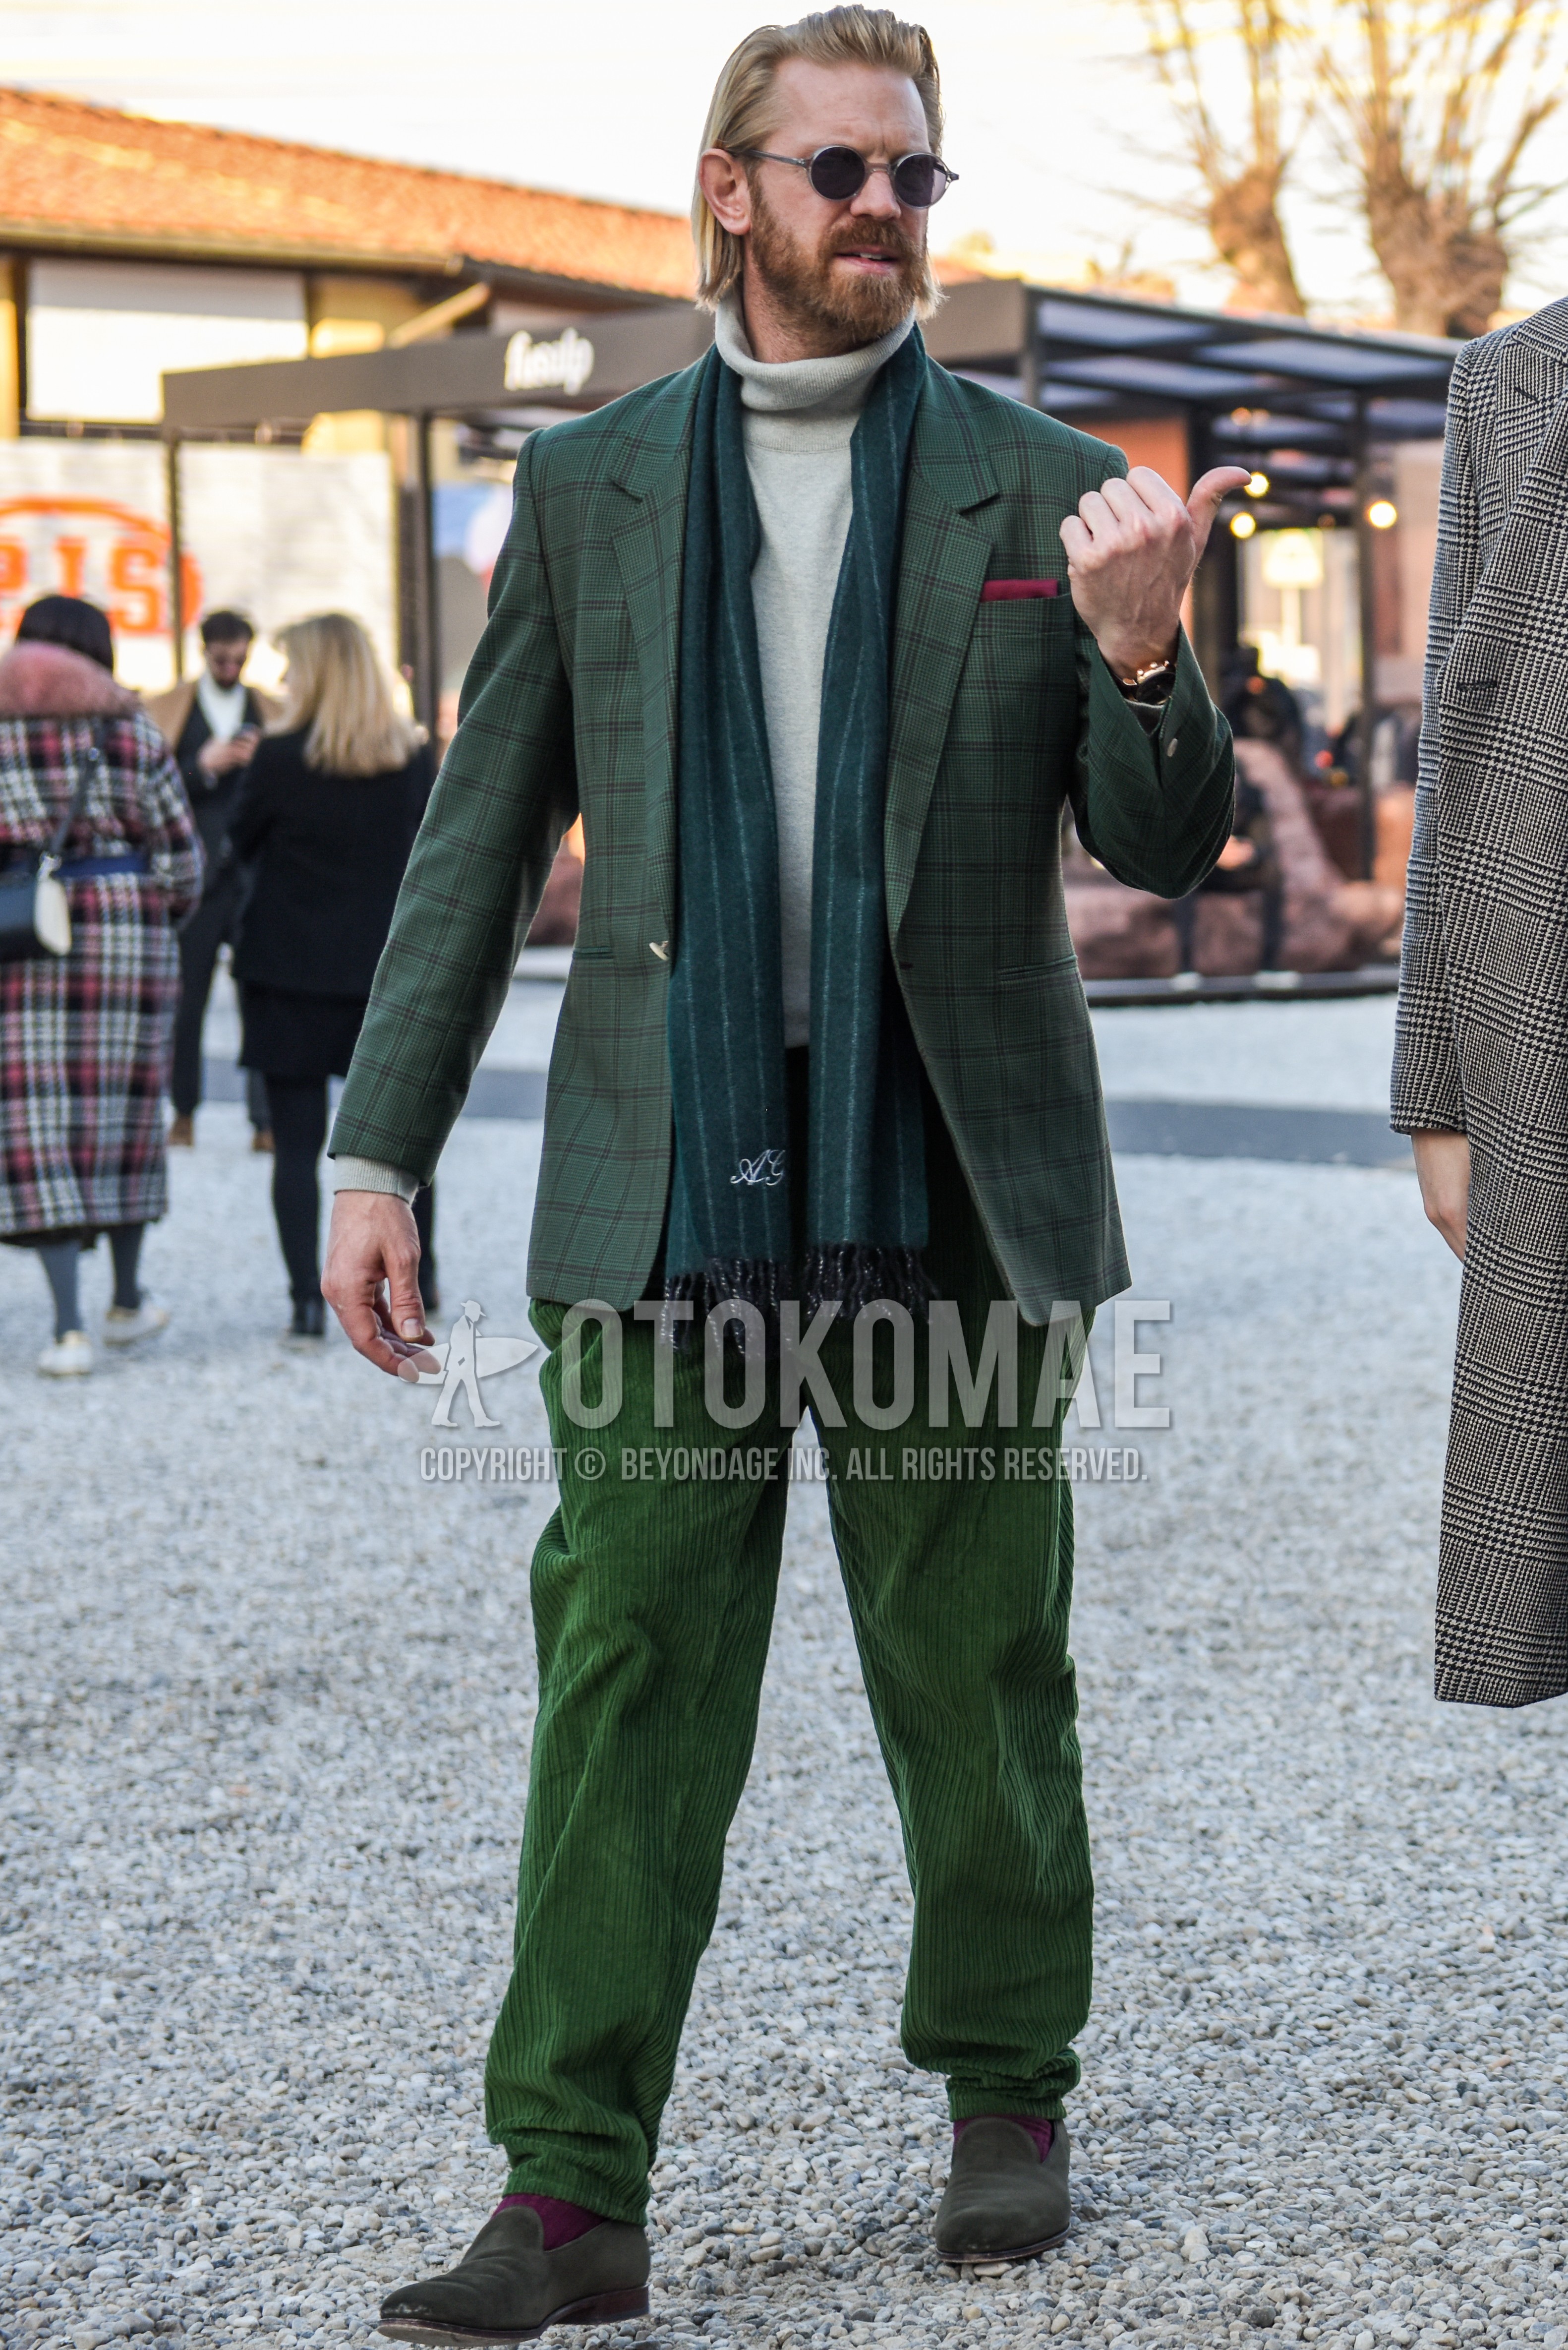 Men's spring autumn outfit with silver plain sunglasses, green stripes scarf, white plain turtleneck knit, green check tailored jacket, green plain winter pants (corduroy,velour), purple plain socks, gray  loafers leather shoes.